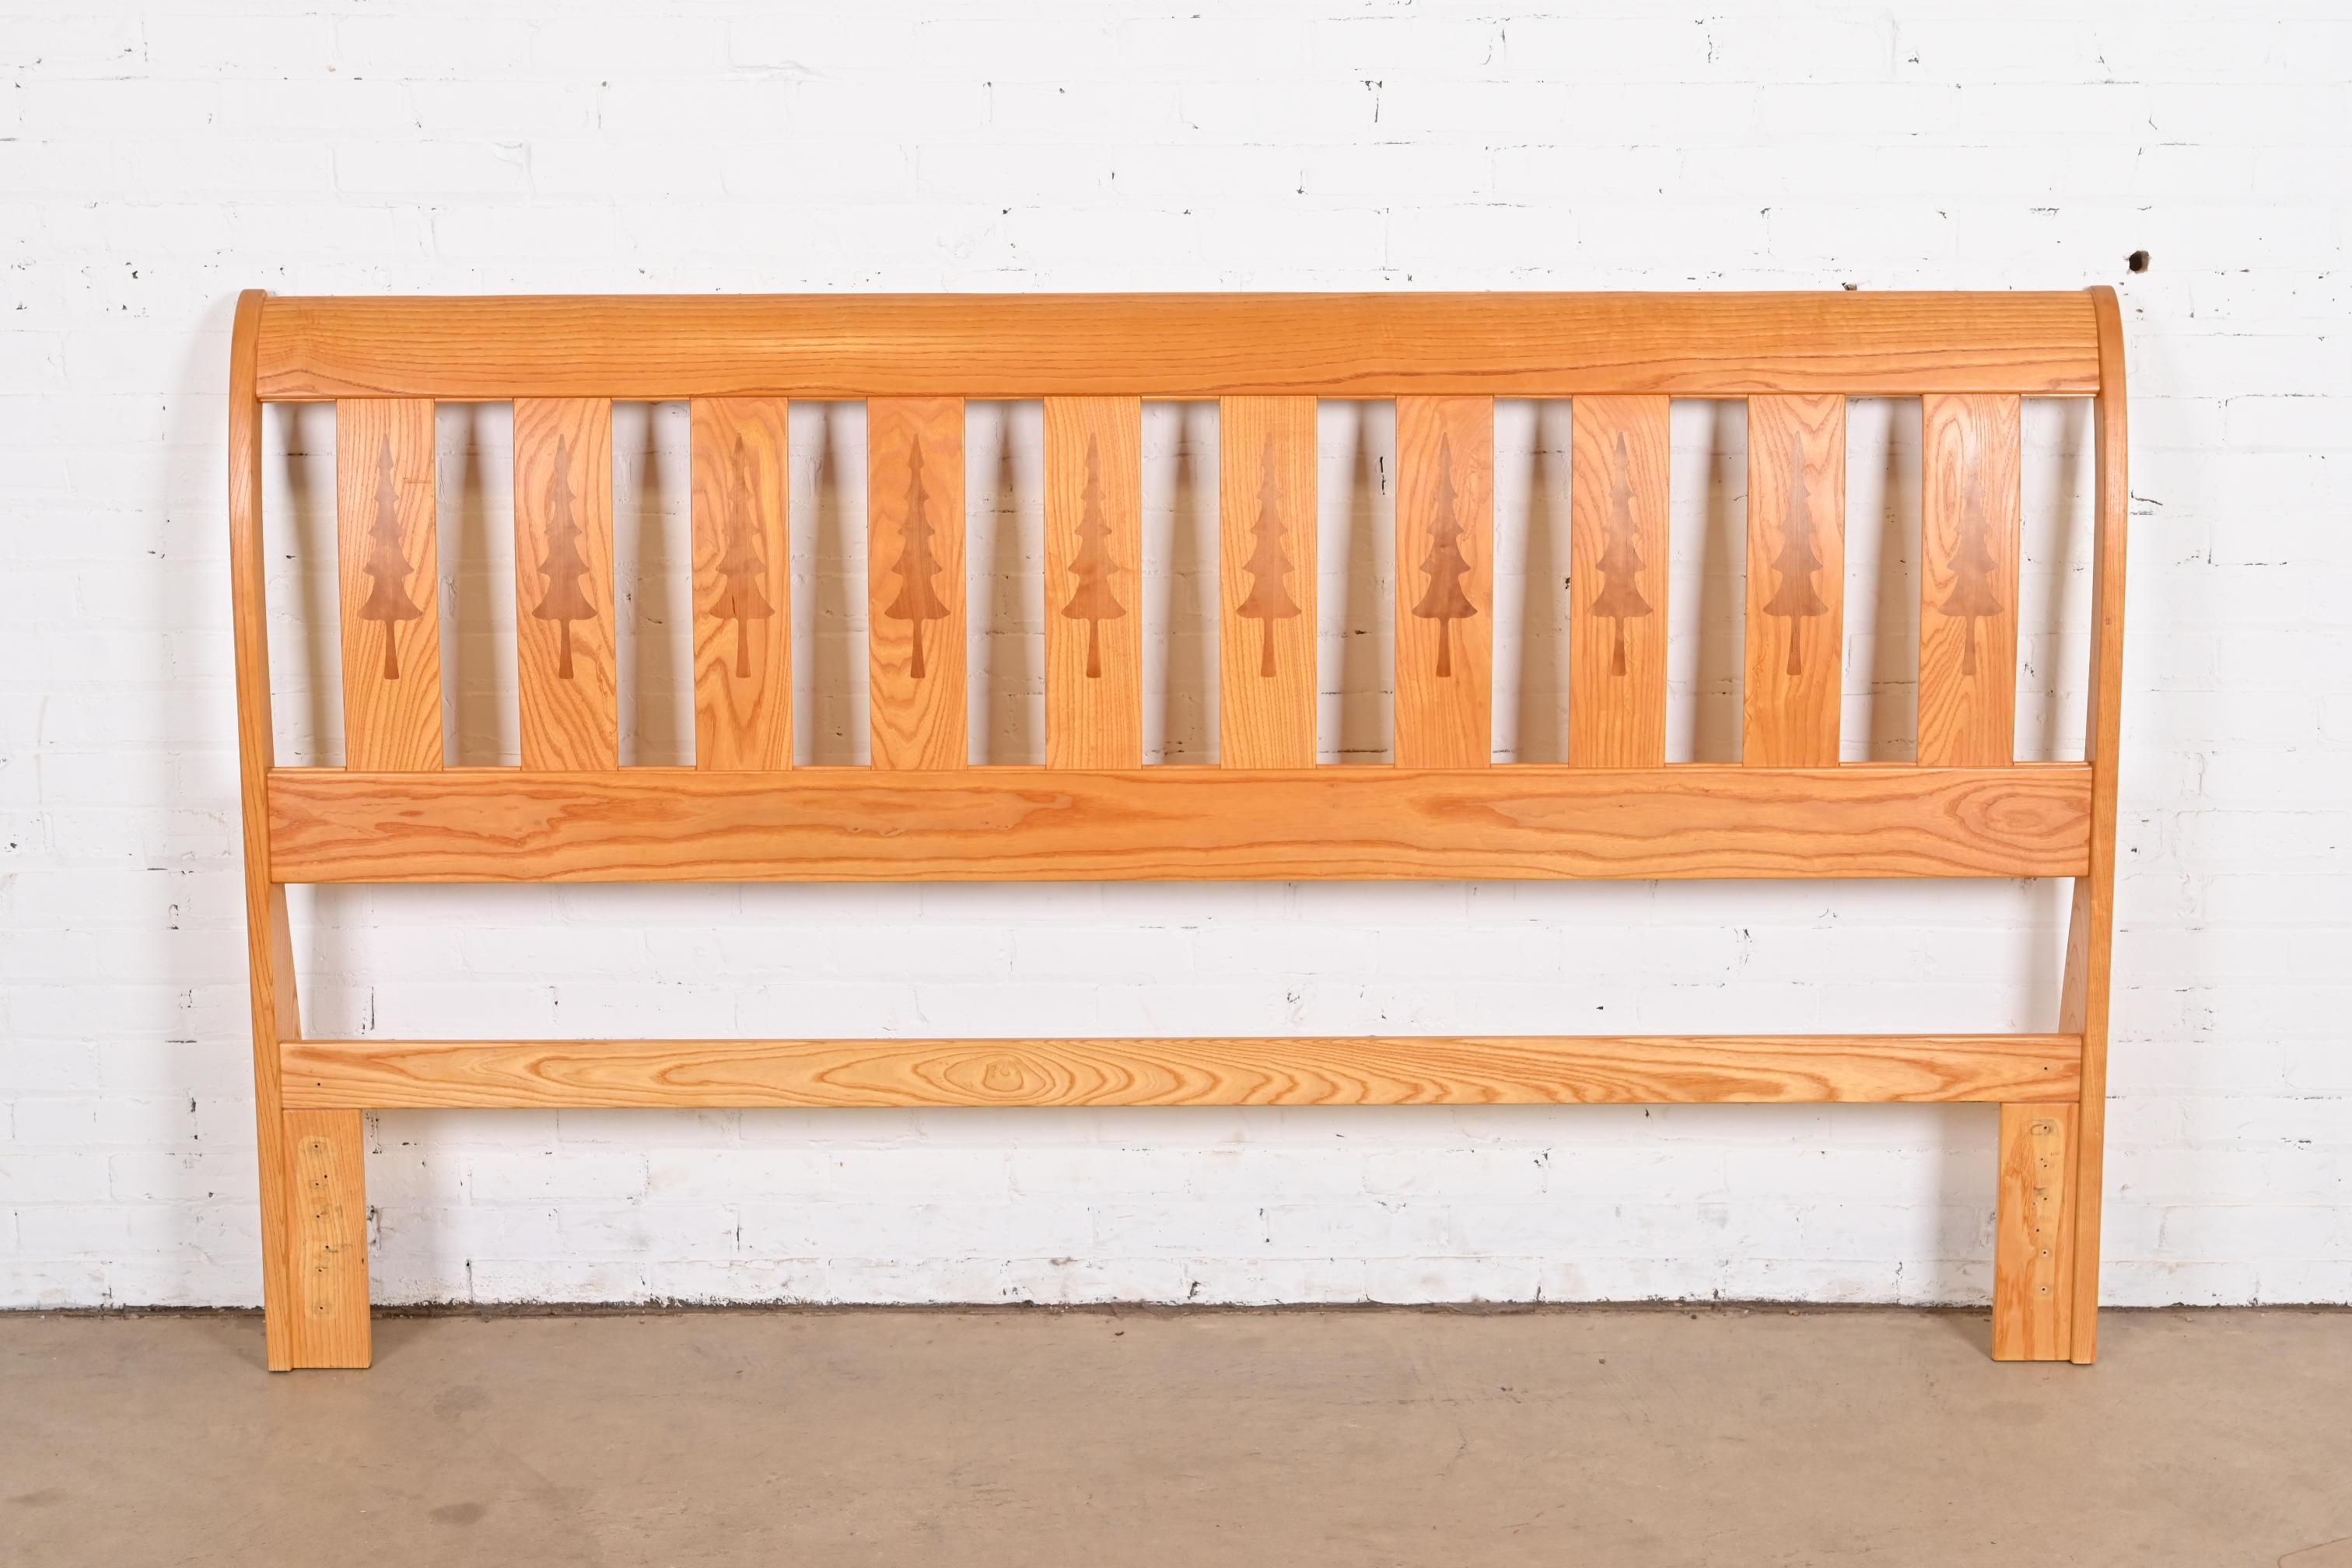 A gorgeous studio crafted Western rustic lodge style king size headboard

By David Fite Studios

USA, Late 20th Century

Sculpted pine, with inlaid evergreen trees.

Measures: 82.25